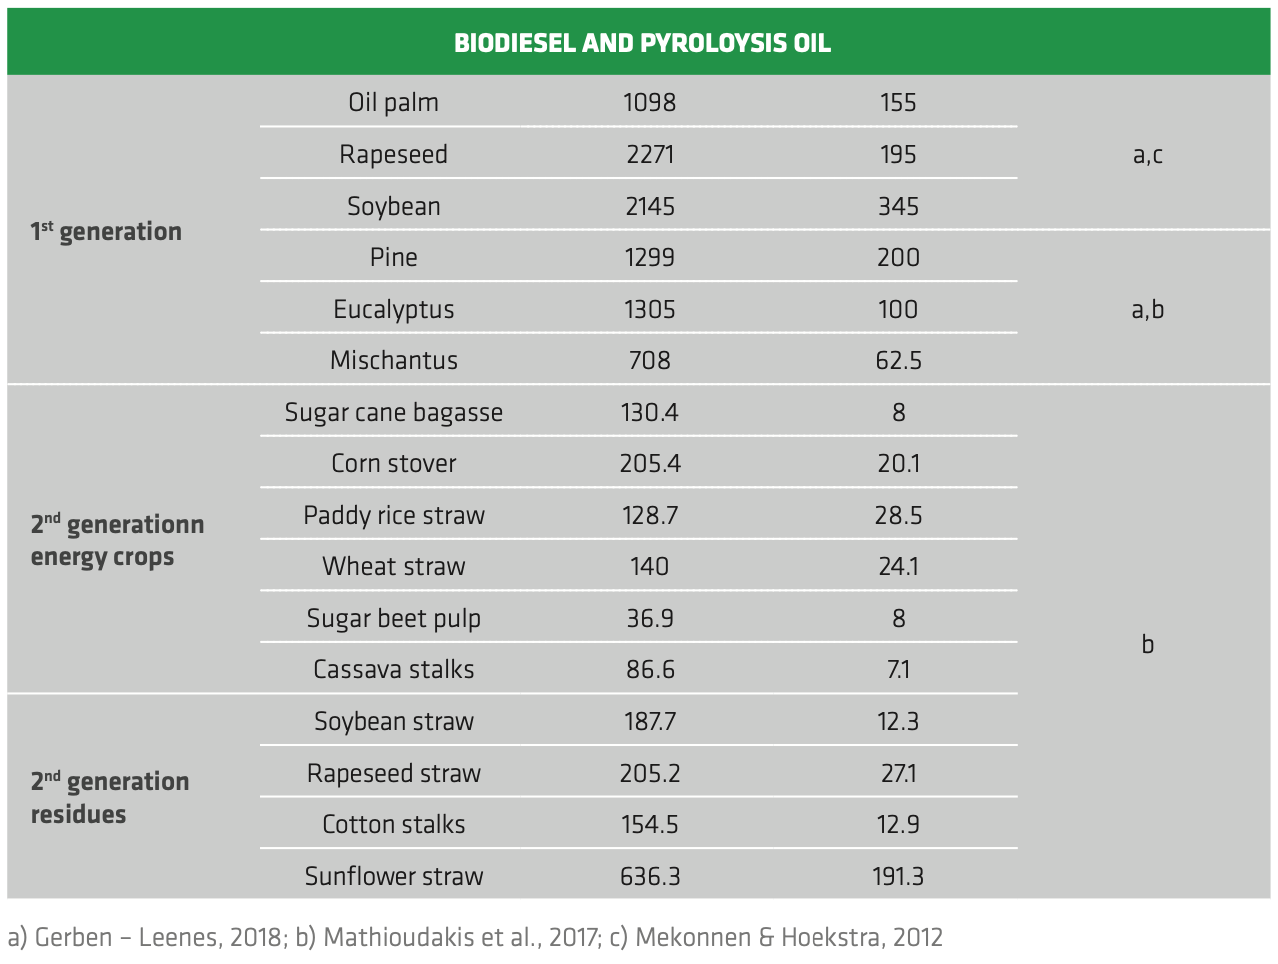 TABLE 3.5 World average water footprint (WF) per unit mass of feedstock and unit energy for different types of biofuel